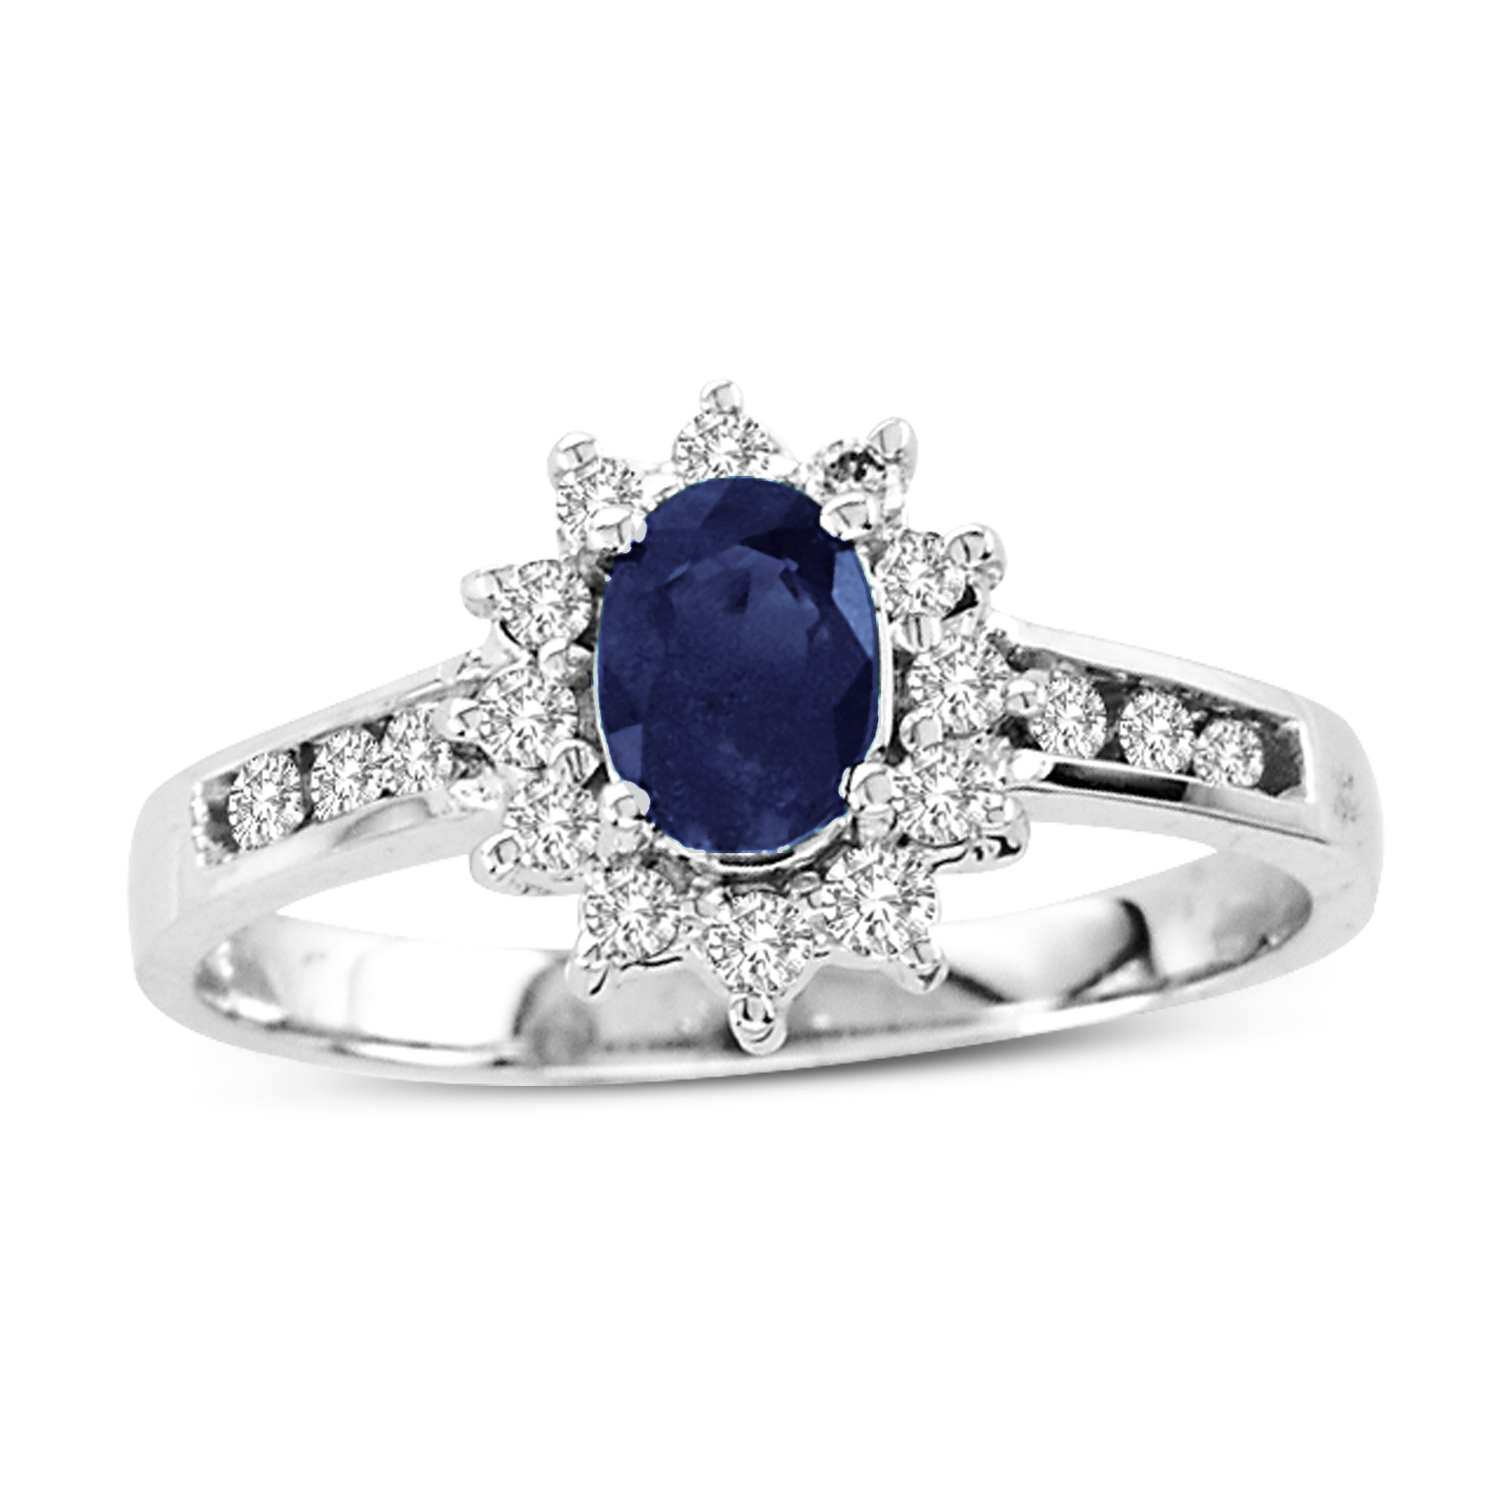 0.84cttw Sapphire and Diamond Fashion Ring set in 14k Gold